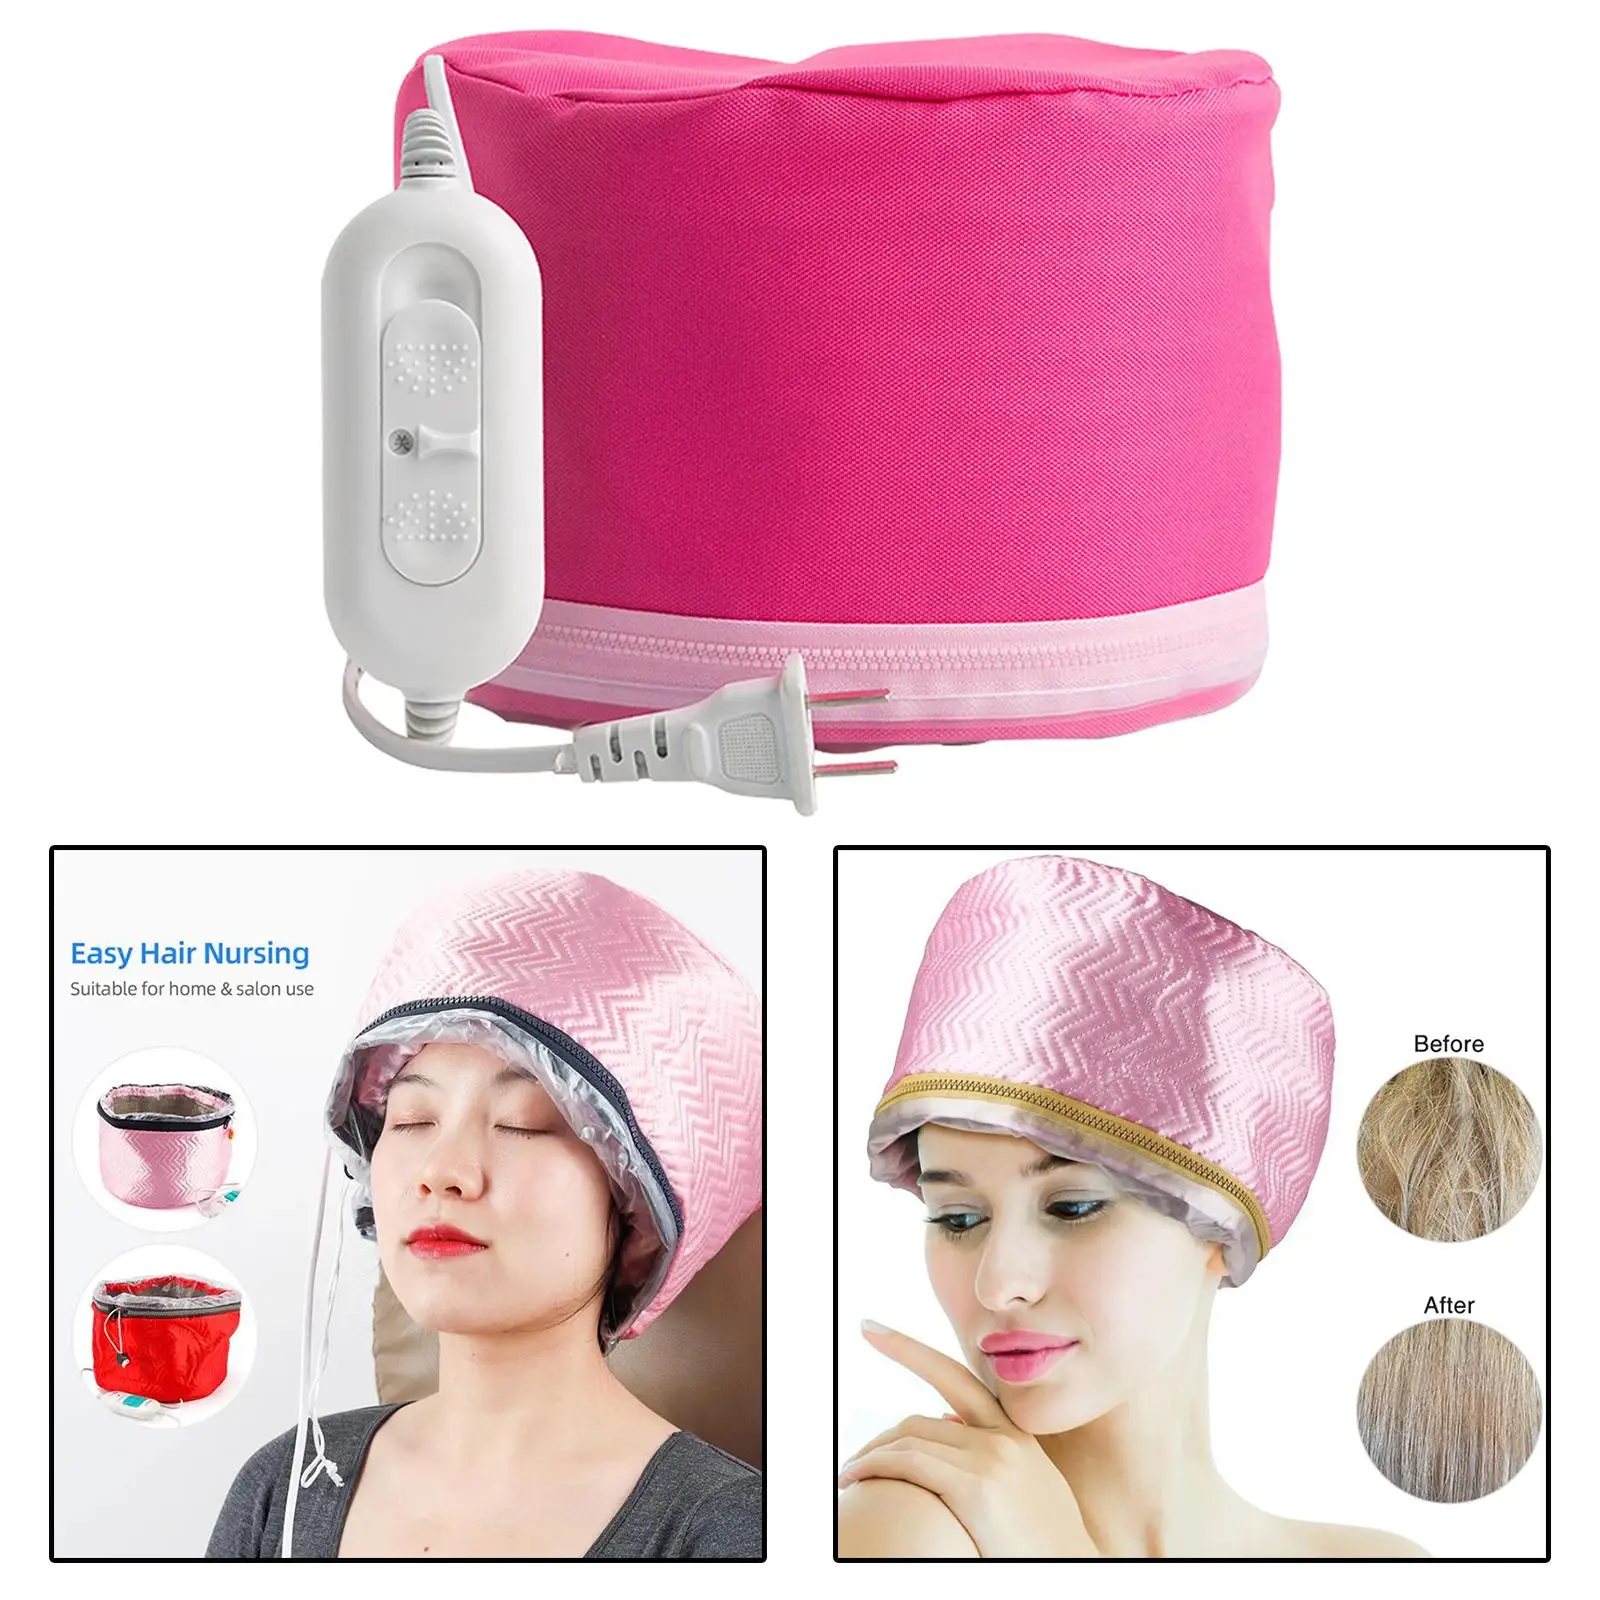 Hair Heating Caps Steamer 3-Mode Adjustable Beauty Tool Household Thermal Caps for Deep Conditioning Salon Hair Scalp Women Men